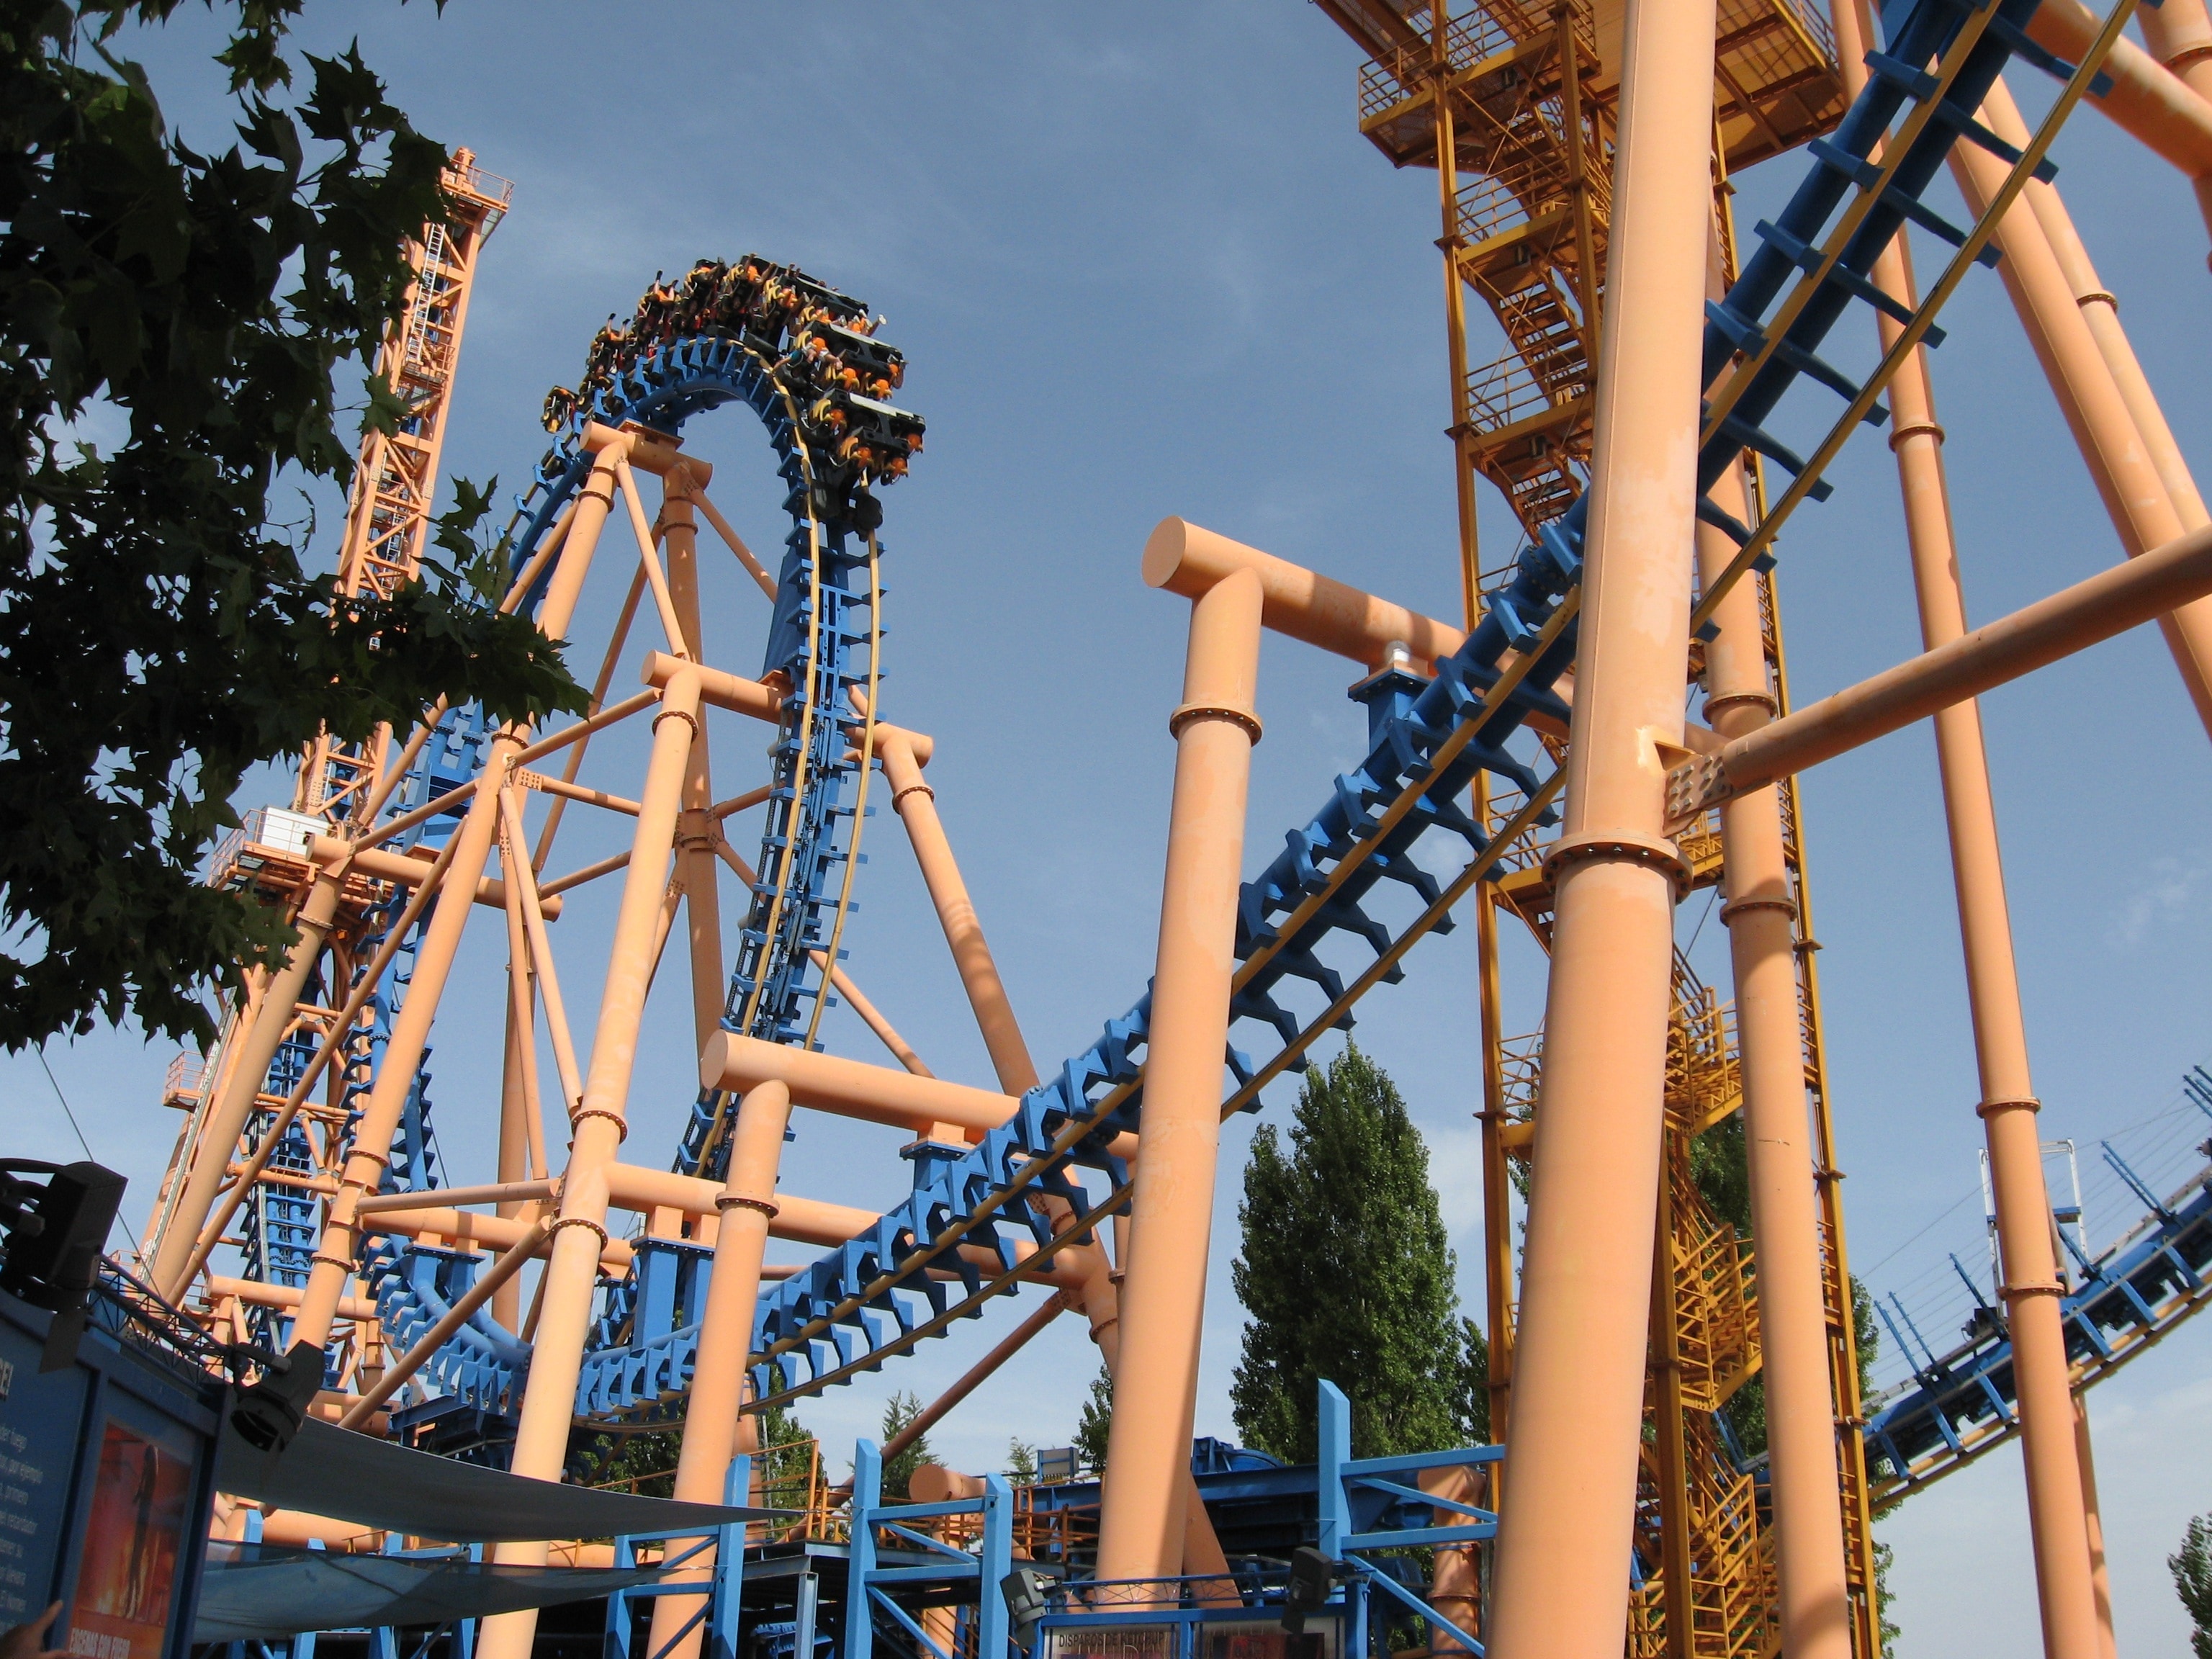 white and blue roller coaster rail